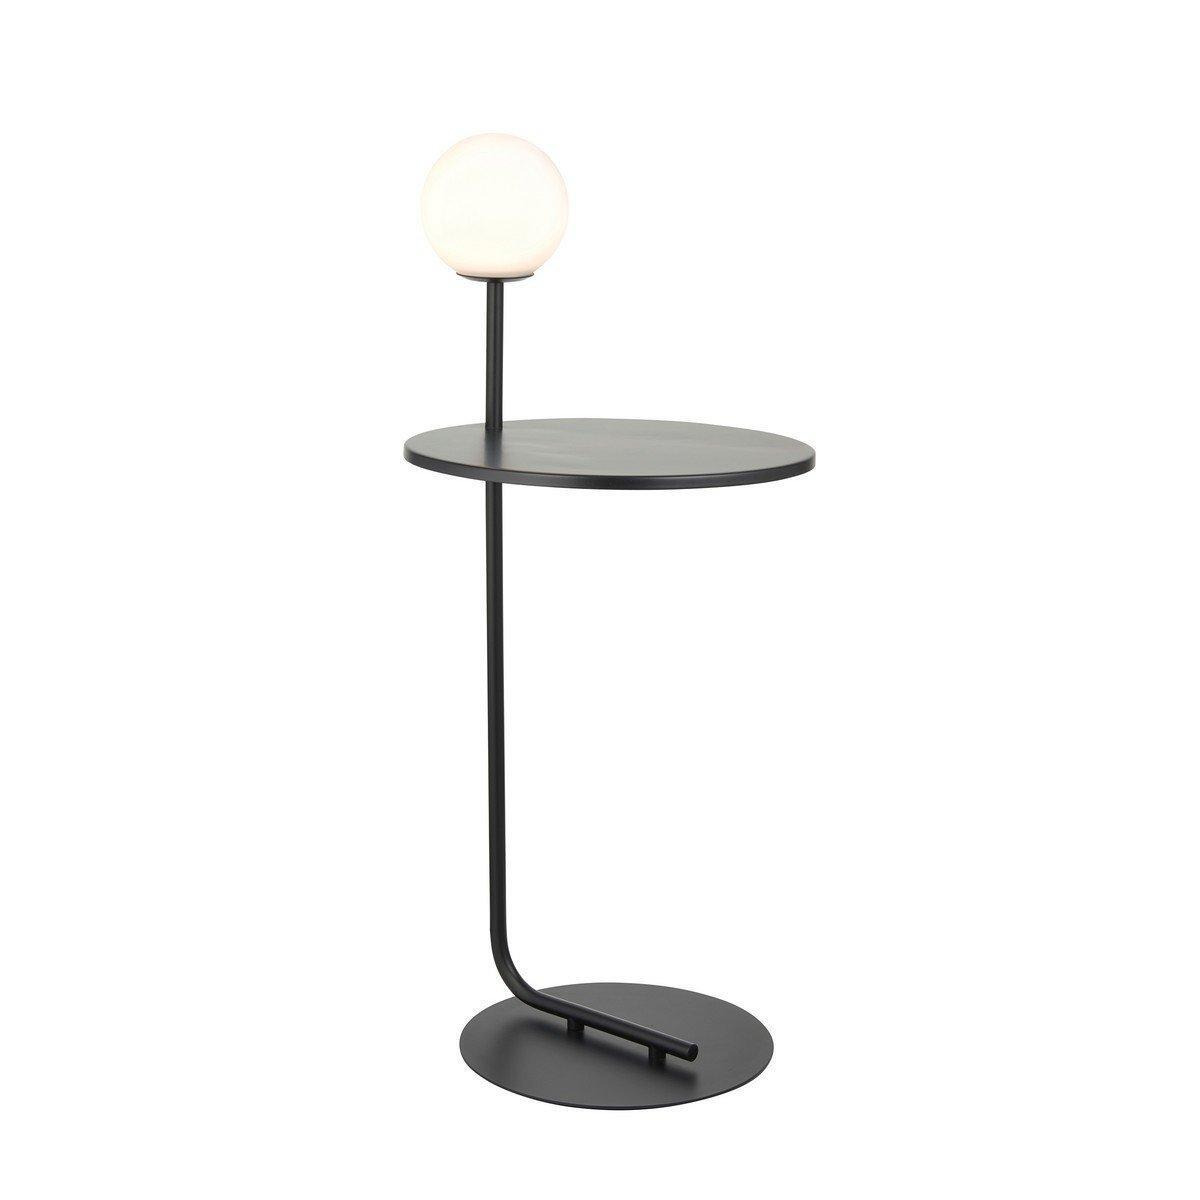 'FROSINONE' Non Dimmable Contemporary Stylish Complete Floor Lamp - image 1